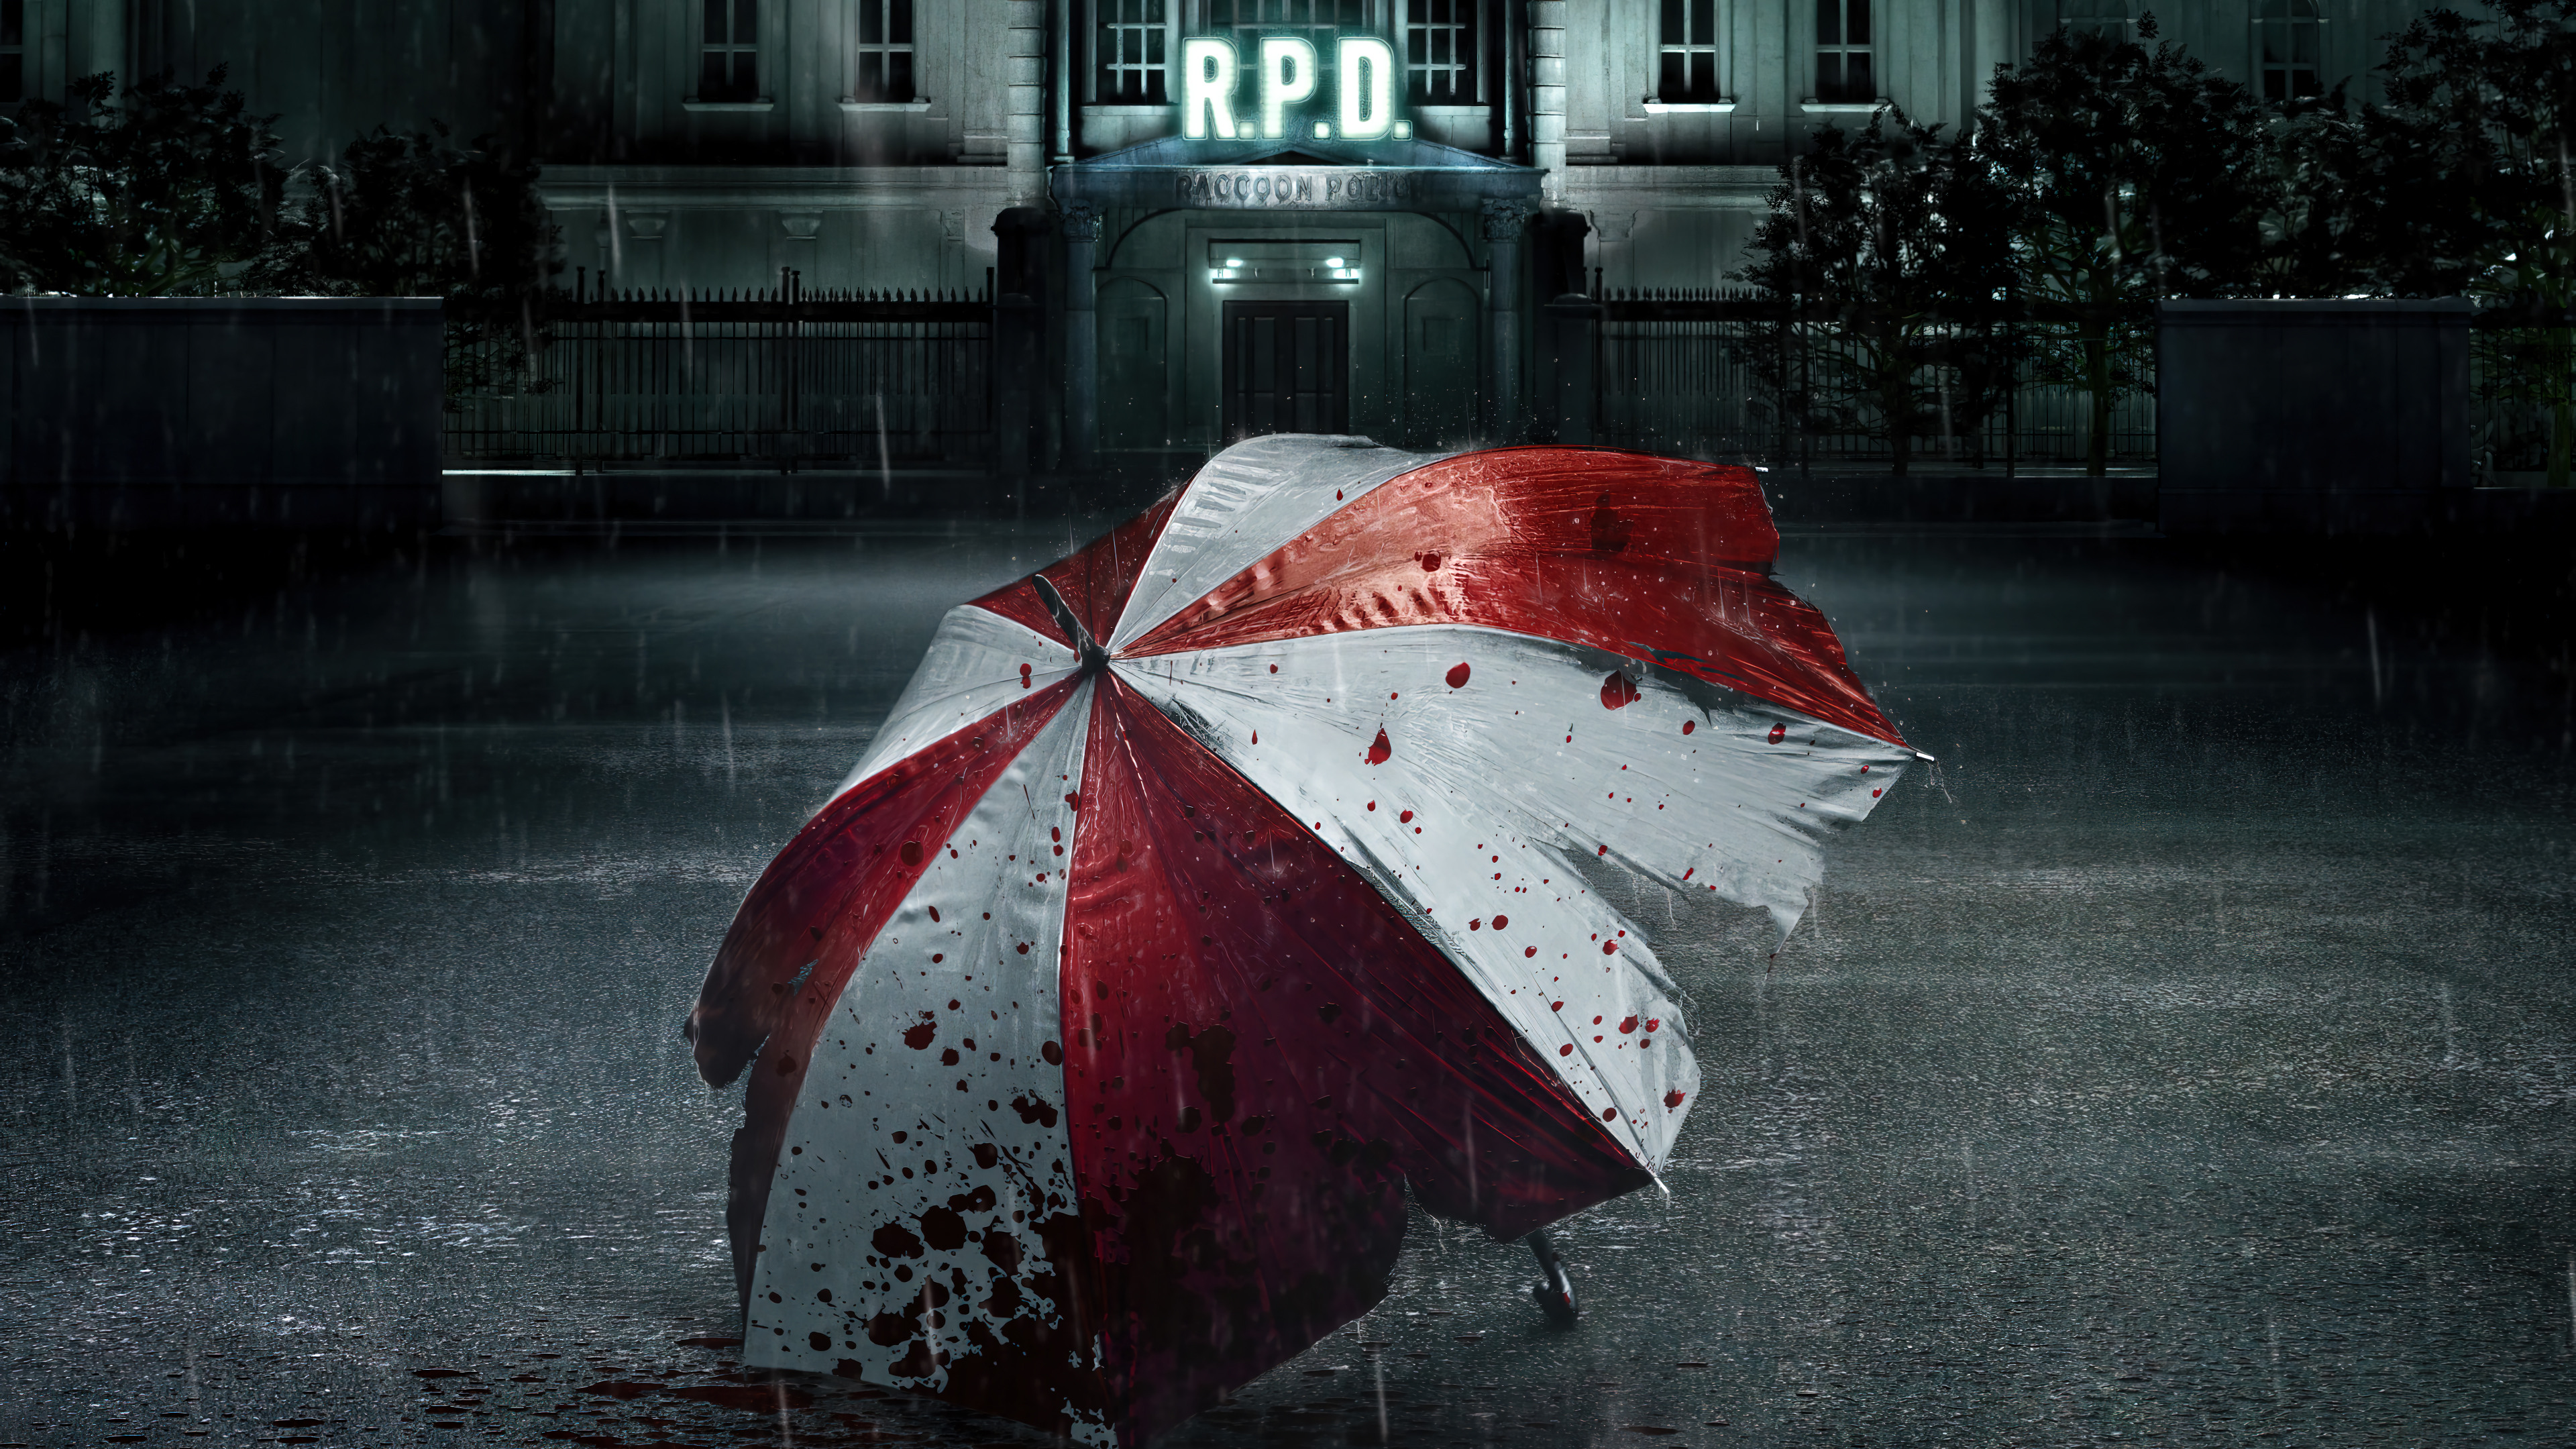 Movie Resident Evil: Welcome to Raccoon City HD Wallpaper | Background Image